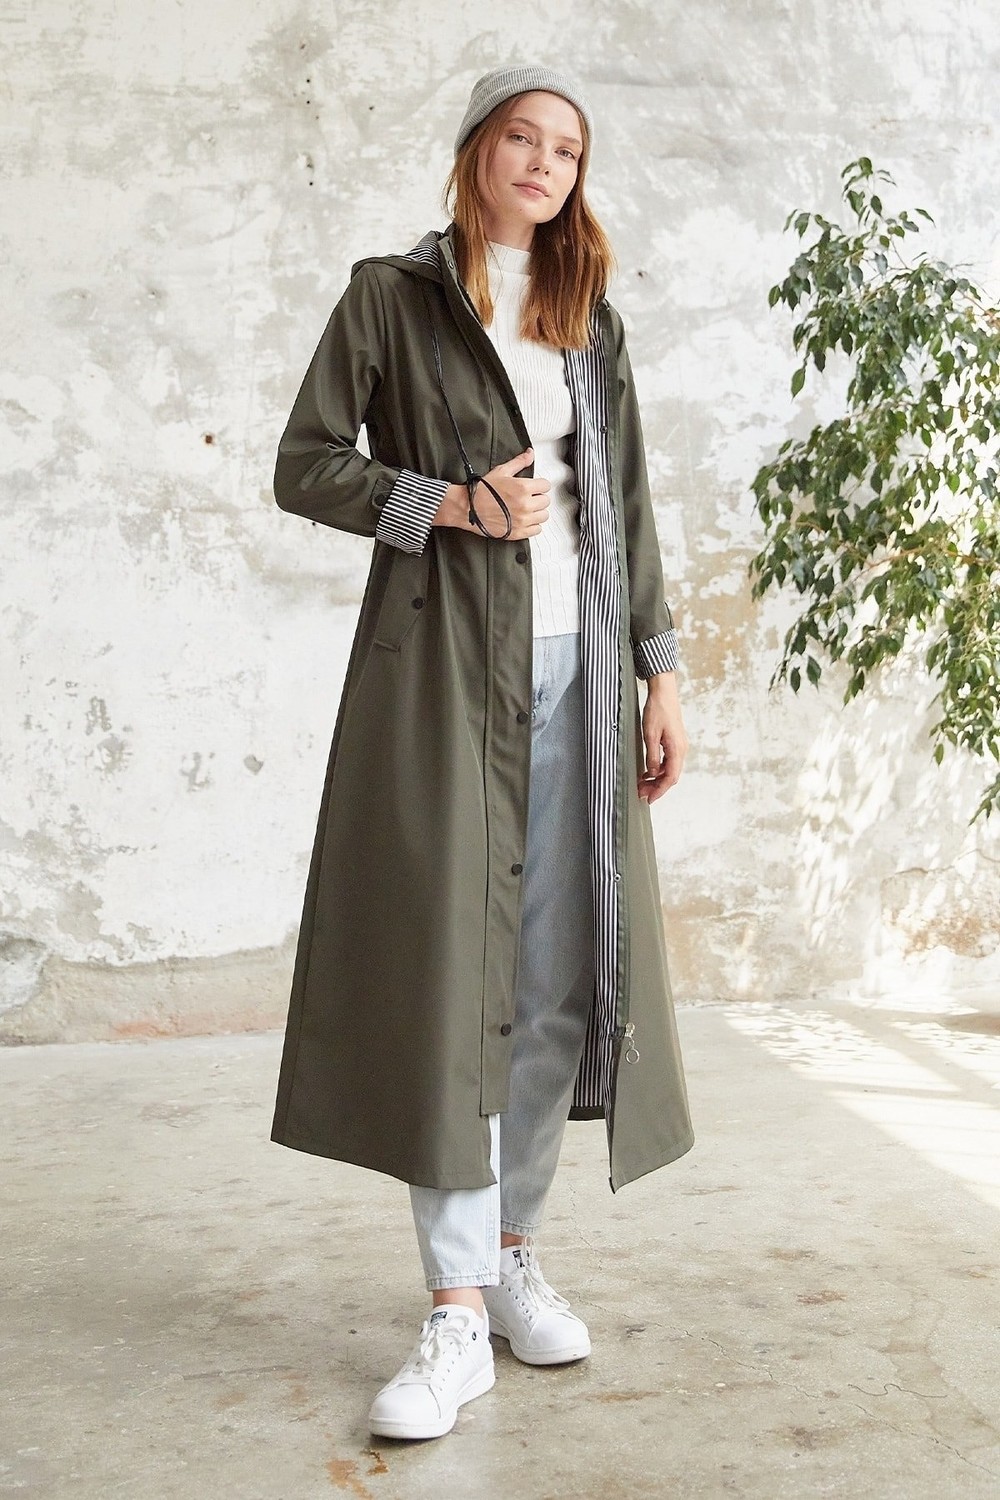 InStyle Lined Patterned Trench Coat - Khaki